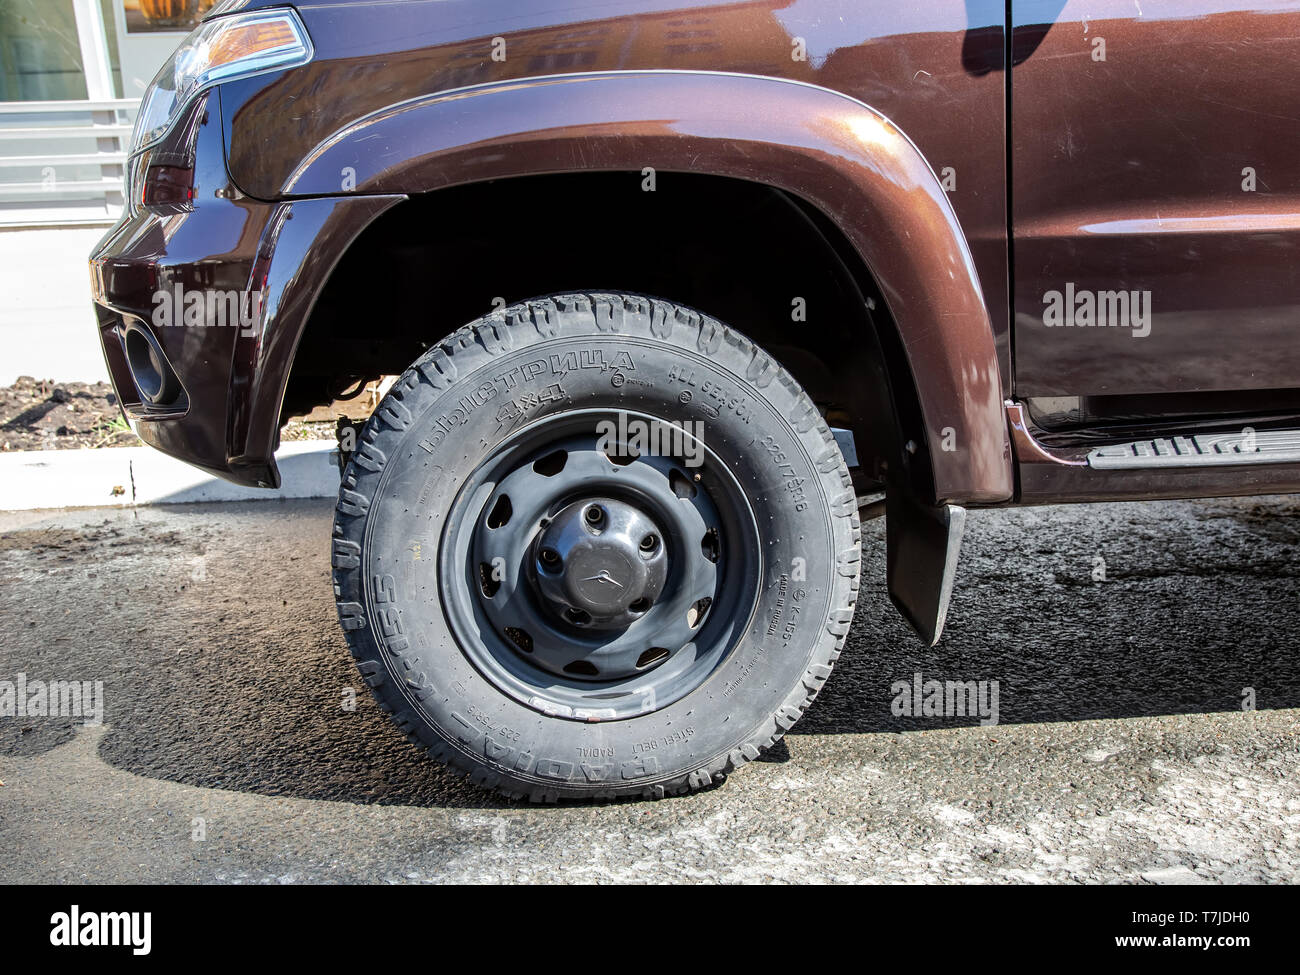 Samara, Russia - May 4, 2019: Close up view of UAZ Patriot vehicle wheel with tire Stock Photo